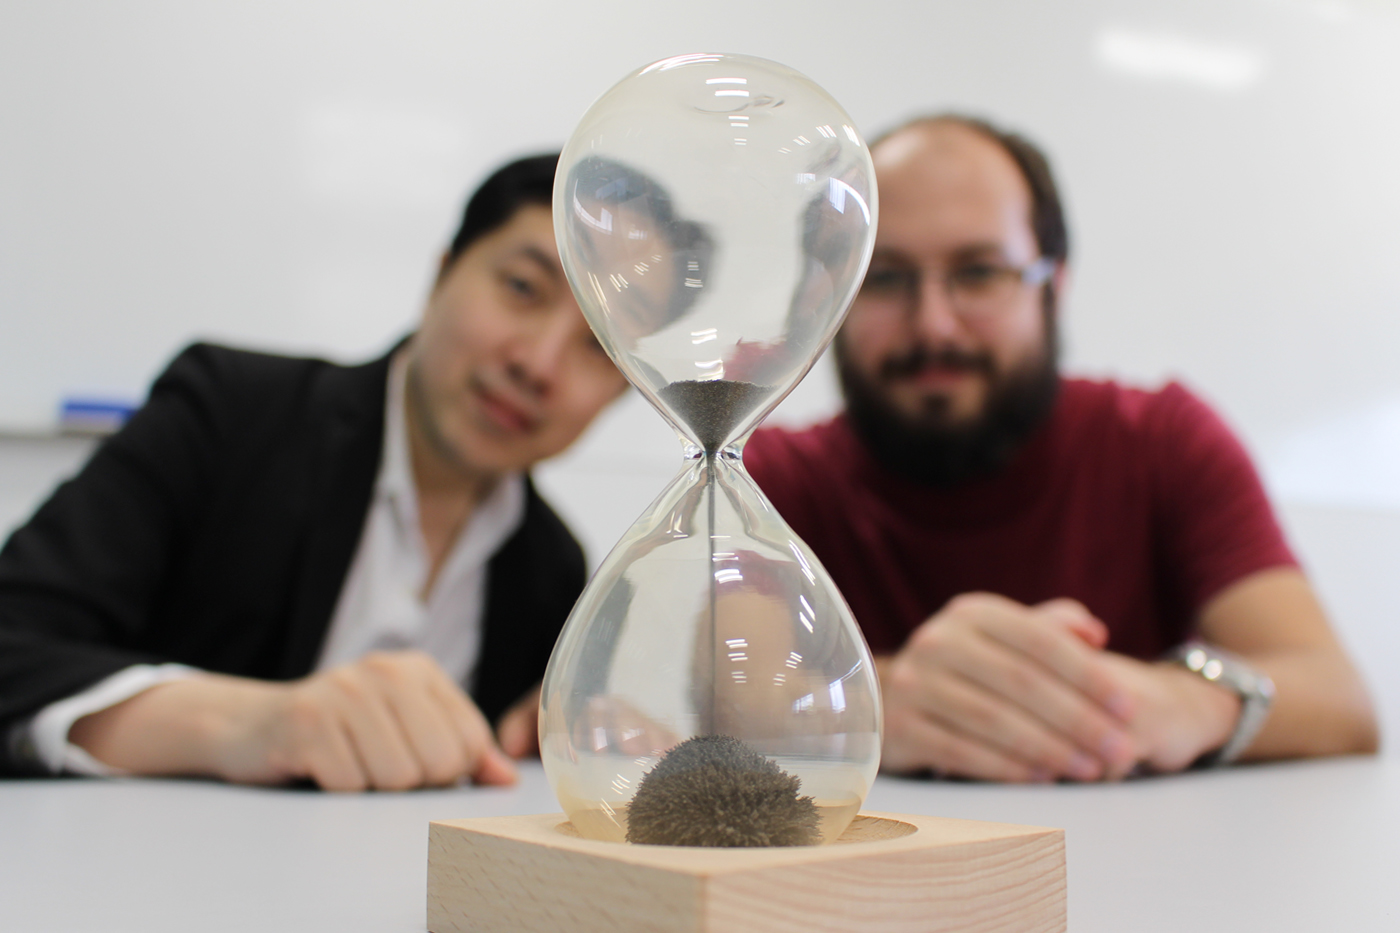 Researchers Mile Gu and Thomas Elliott pictured with an hourglass